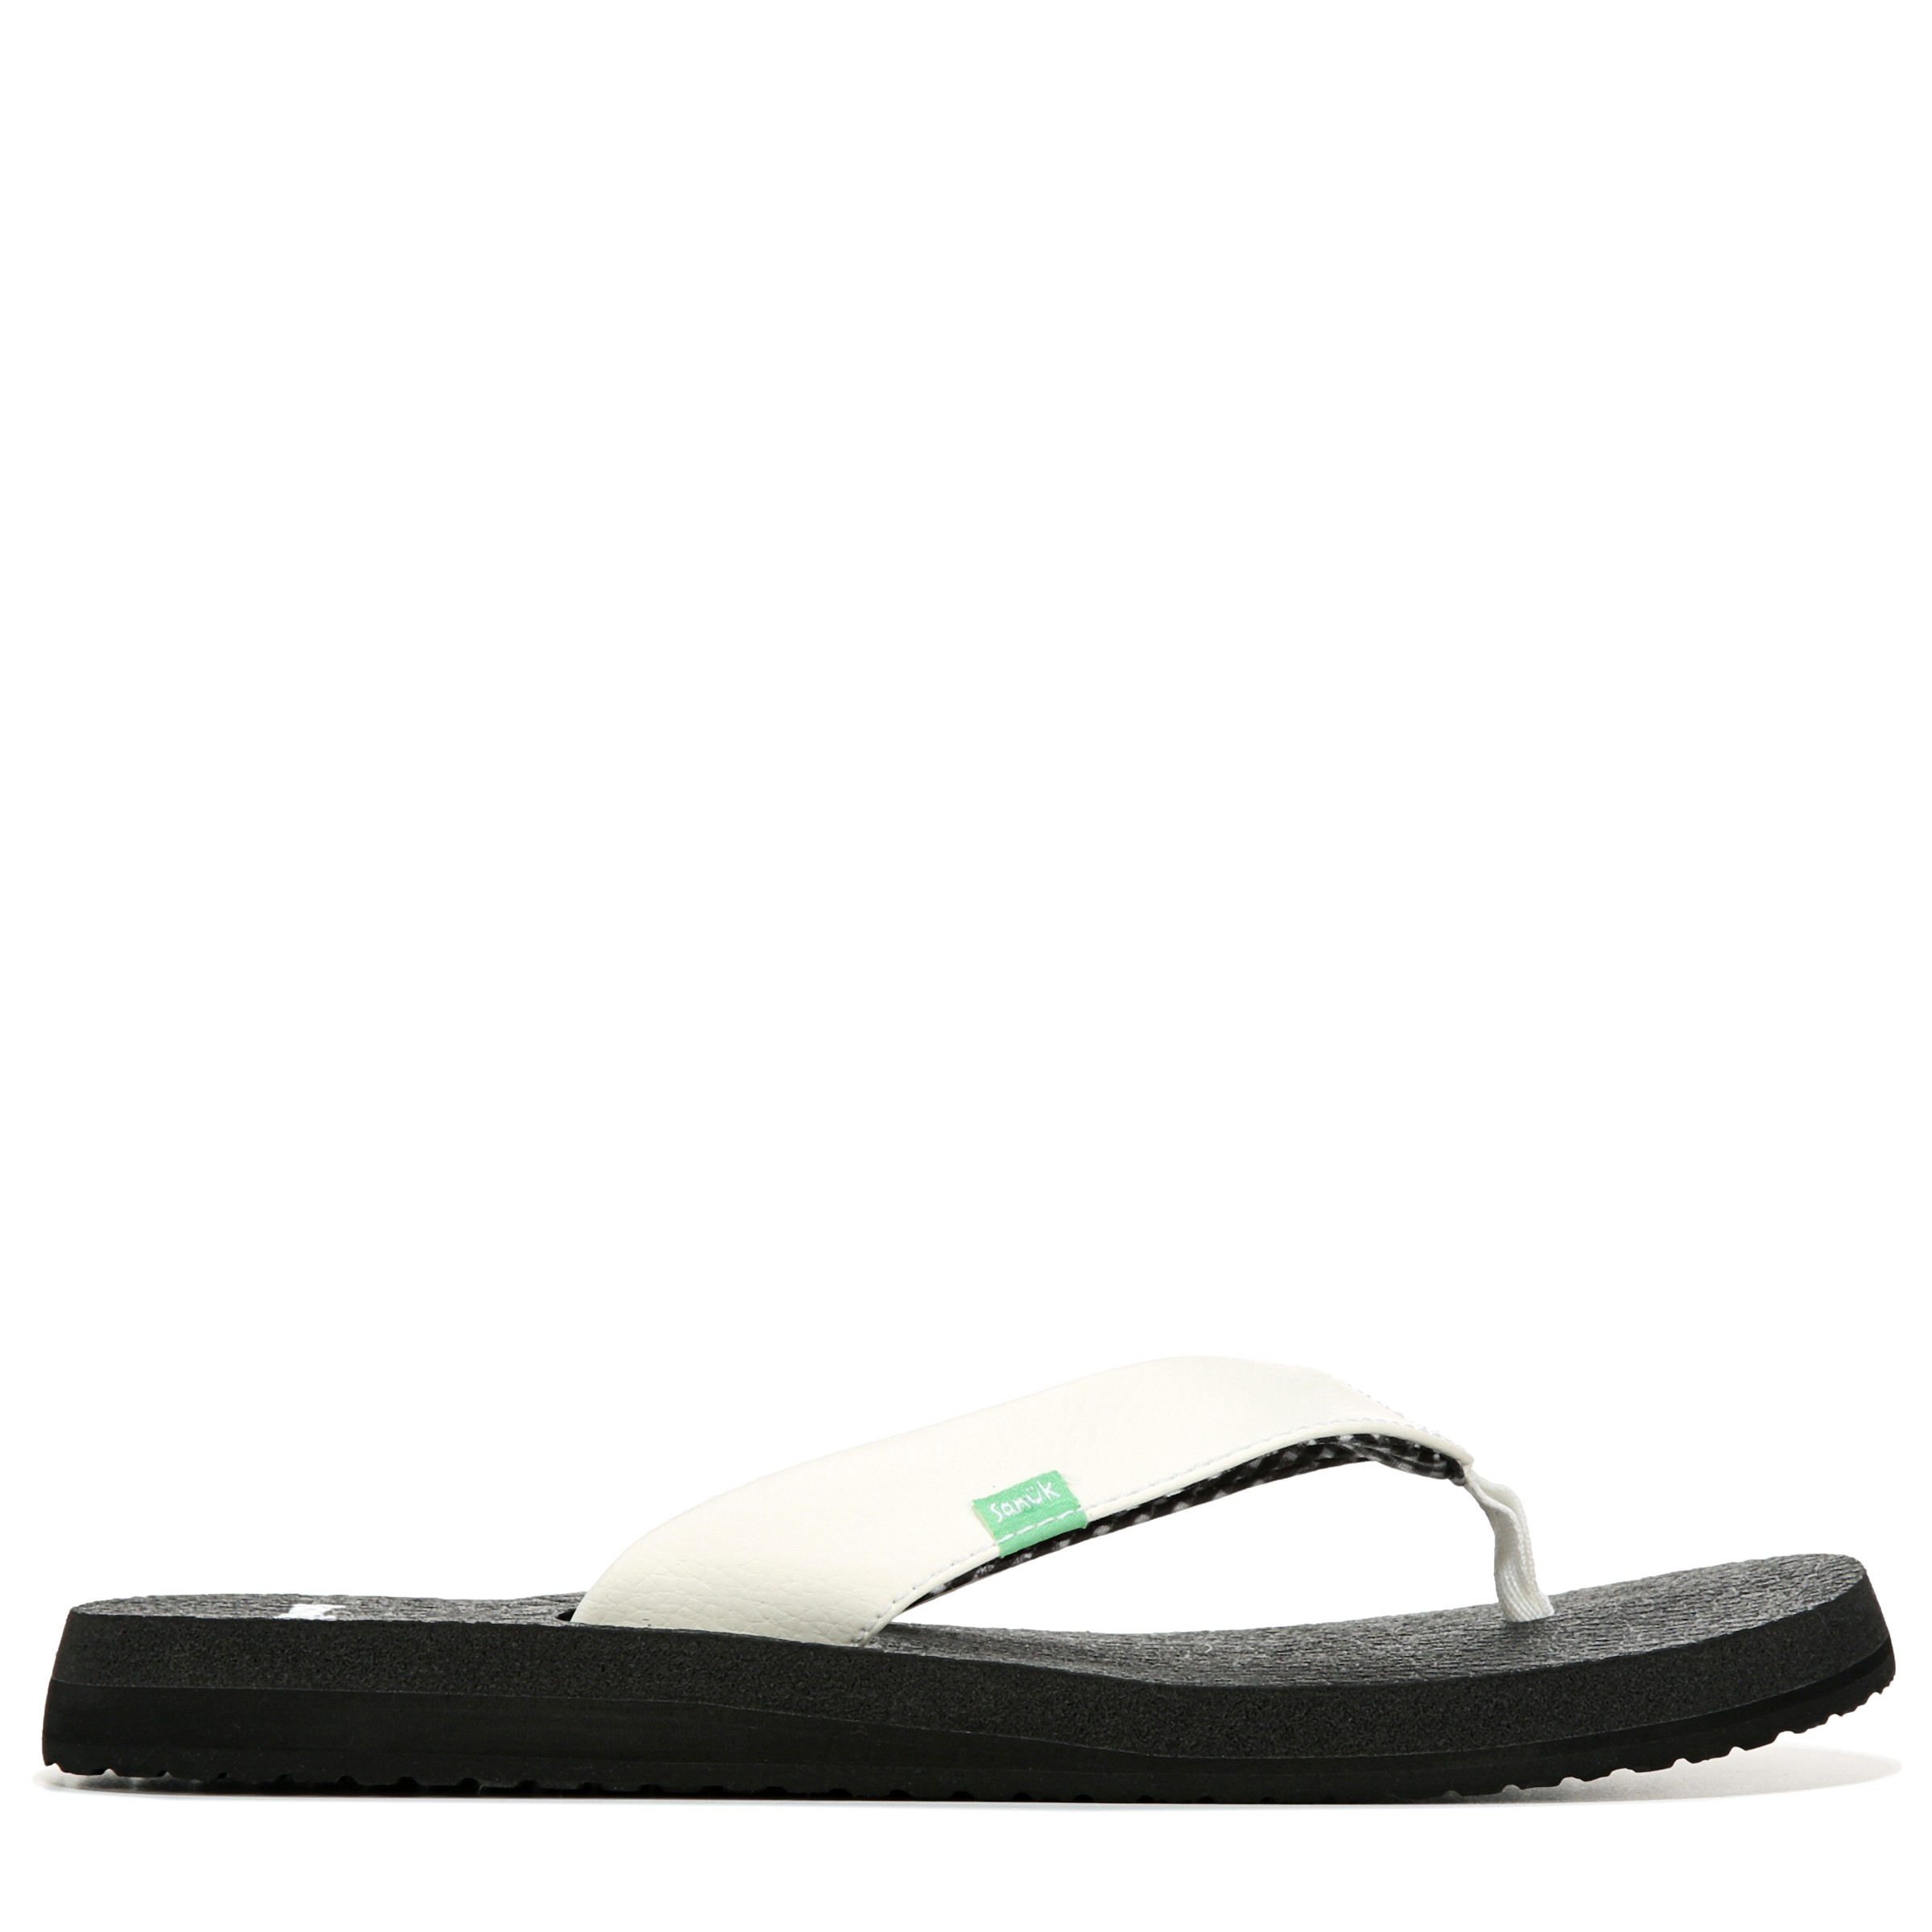 Buy Riverberry Women's Yoga Flip Flop with Yoga Mat Padding Online